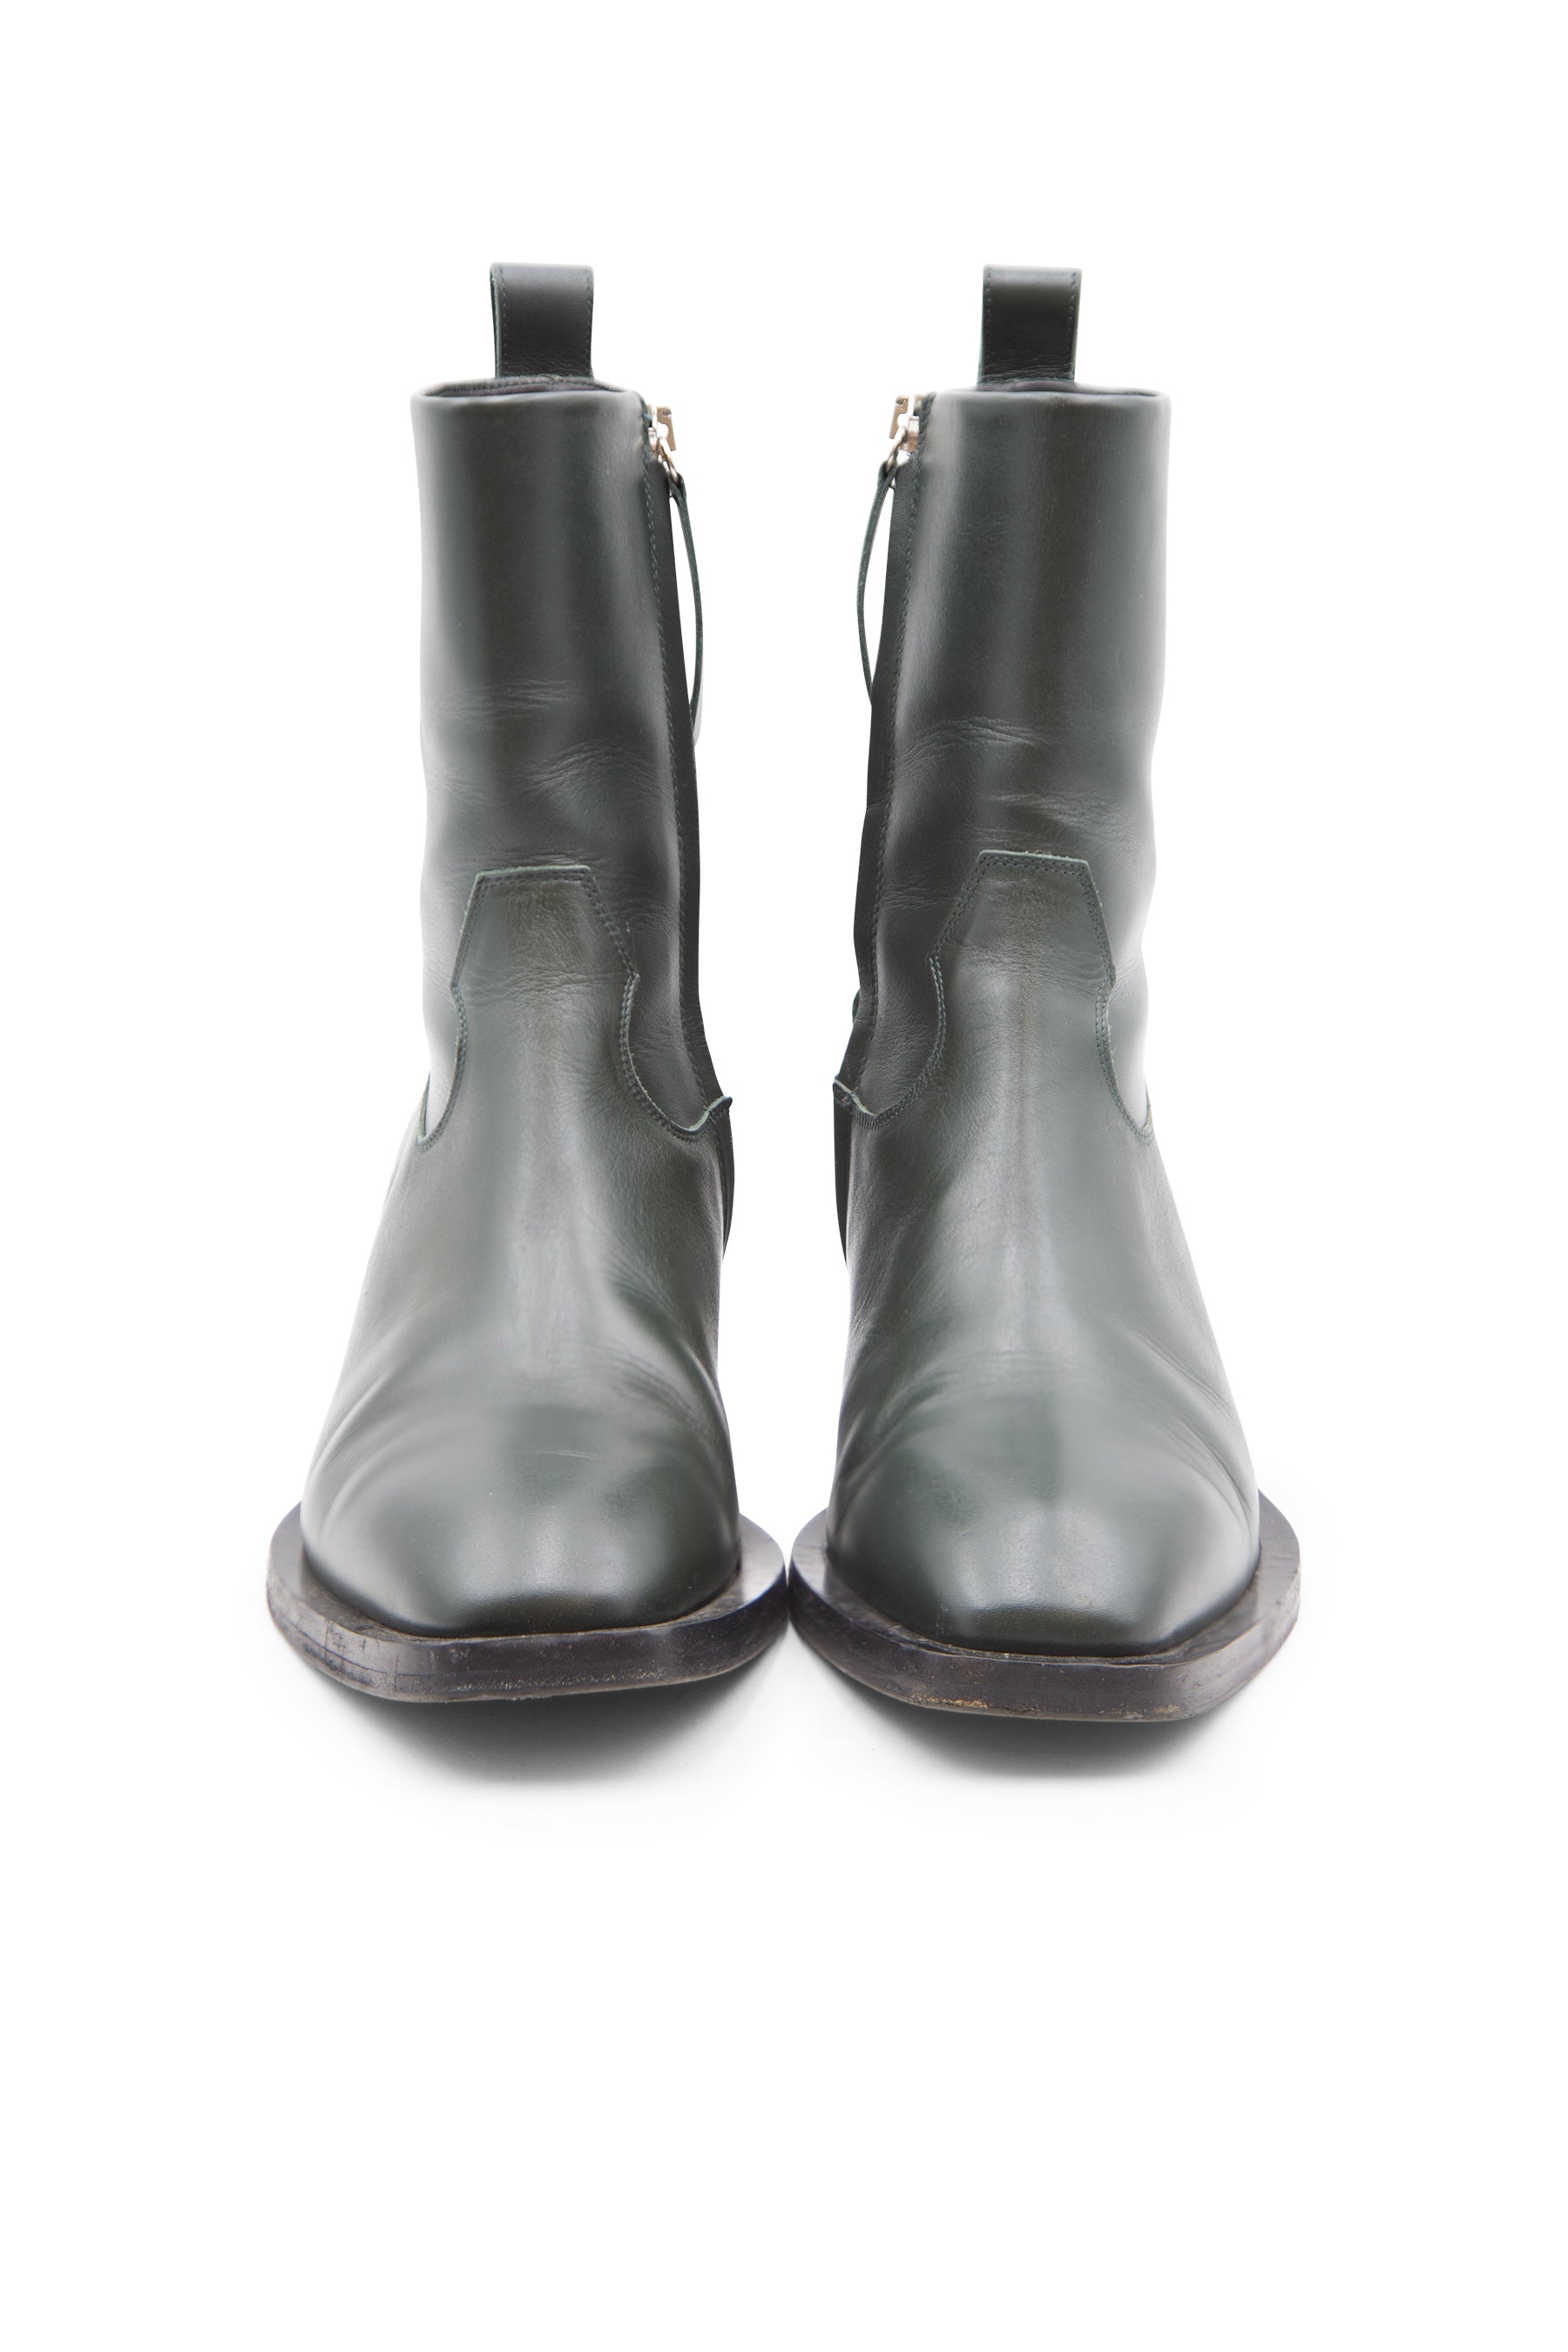 Aeyde Luis Leather Boots - Green for Women